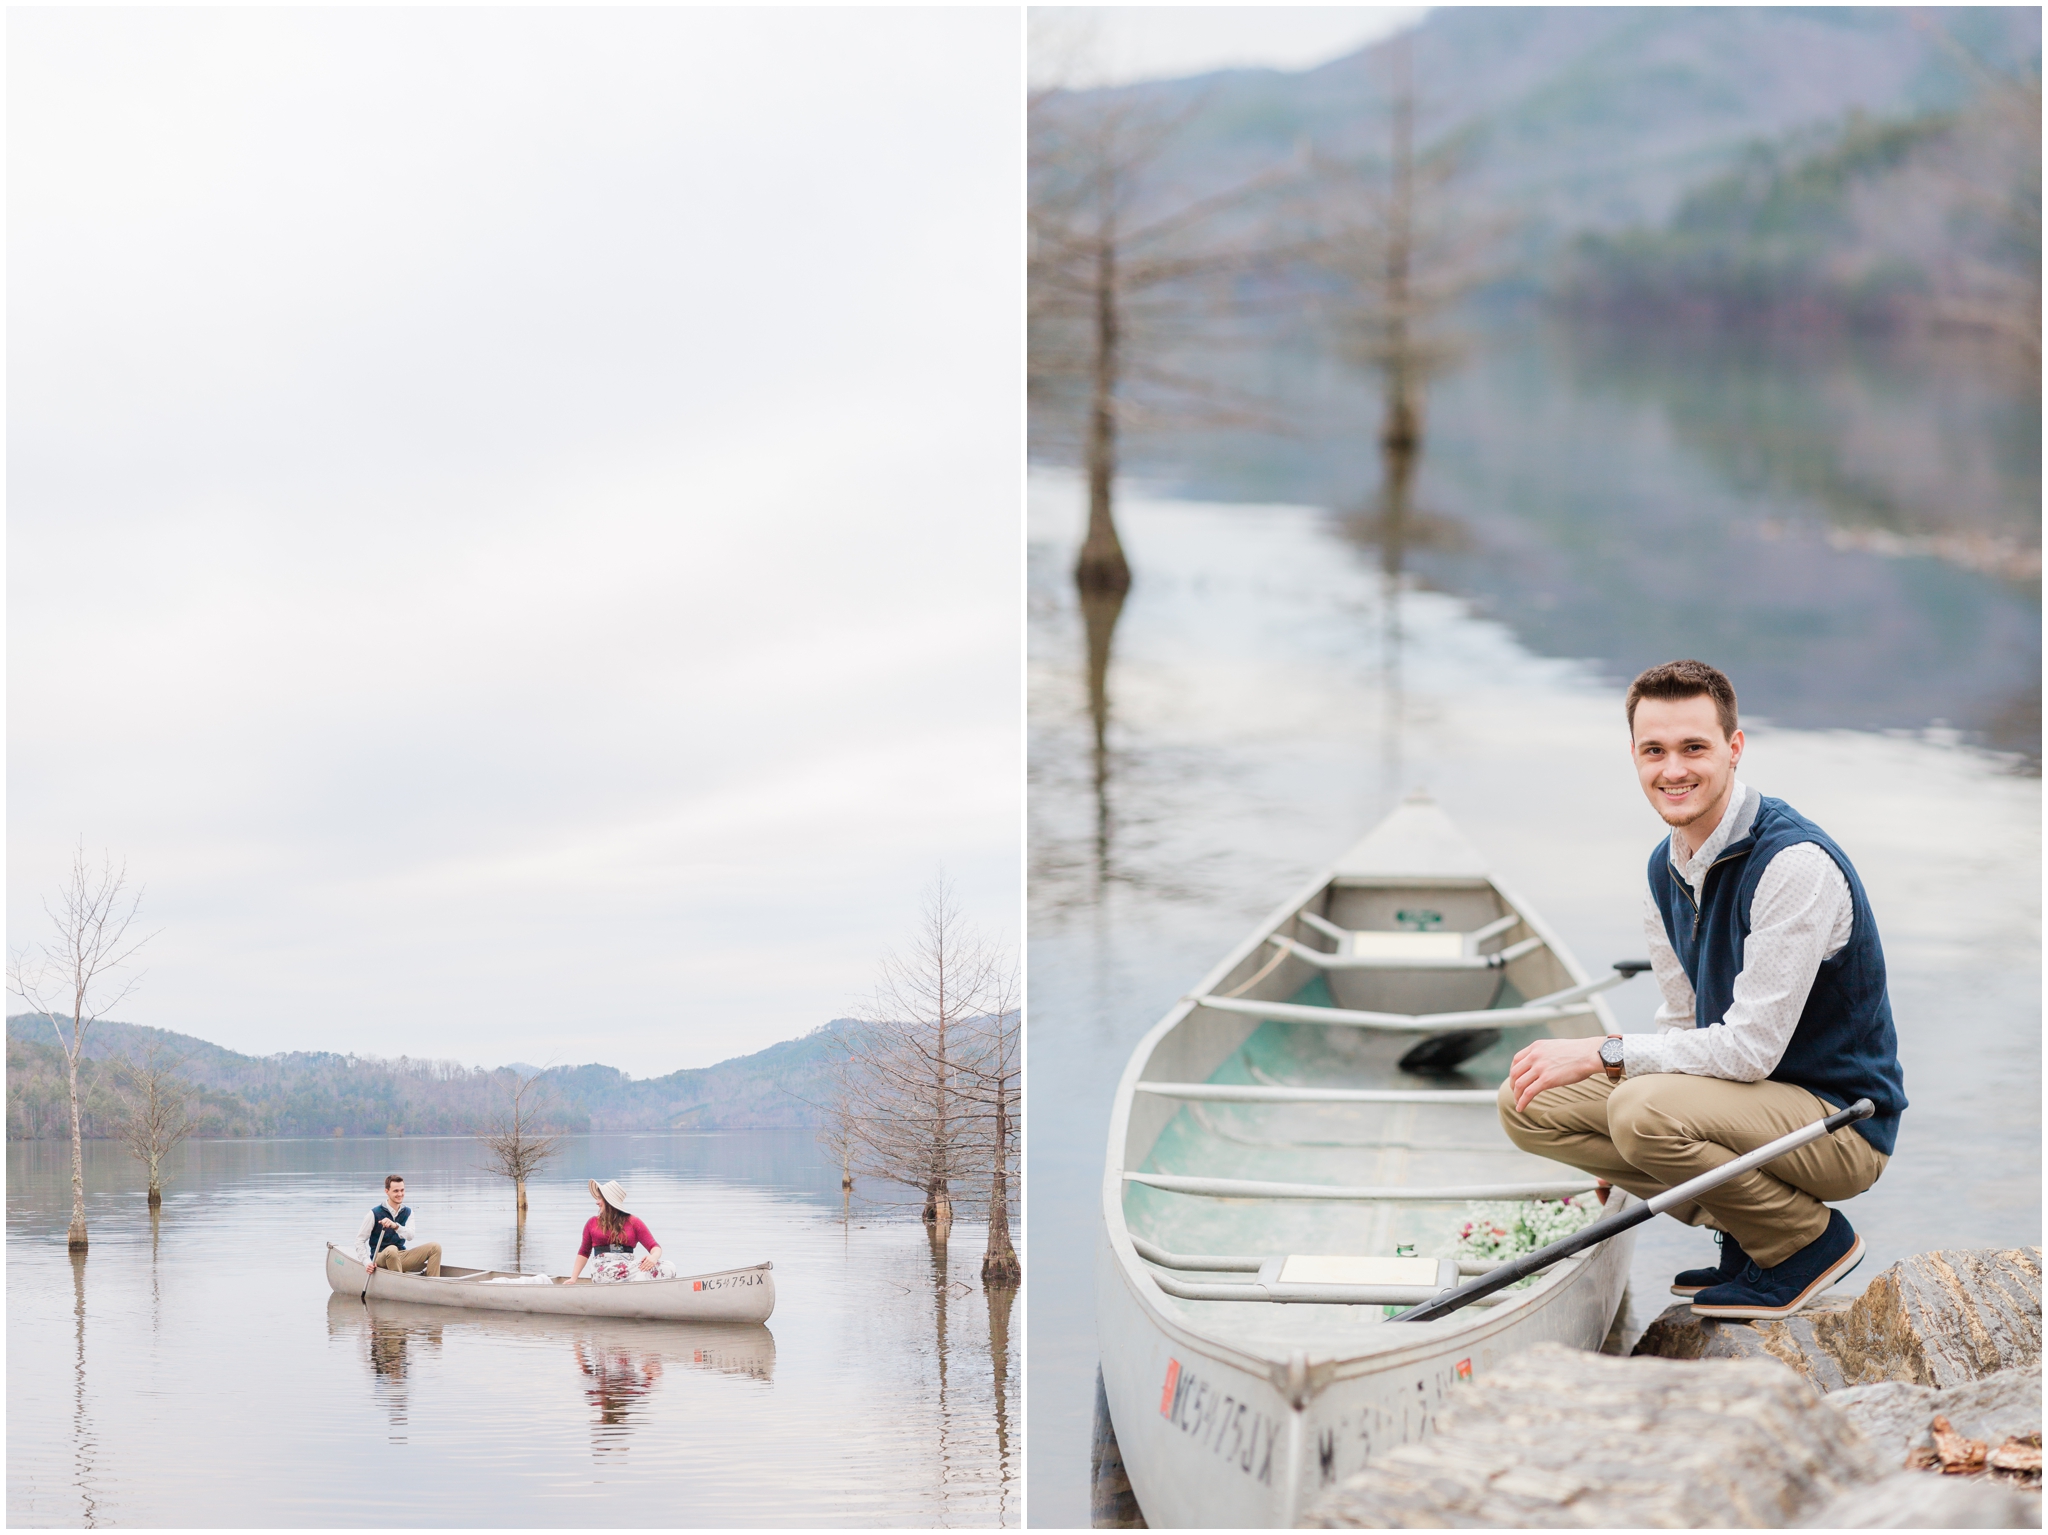 danae church and scot brunner engagement session on ocoee lake in cherokee national forest and ocoee lake